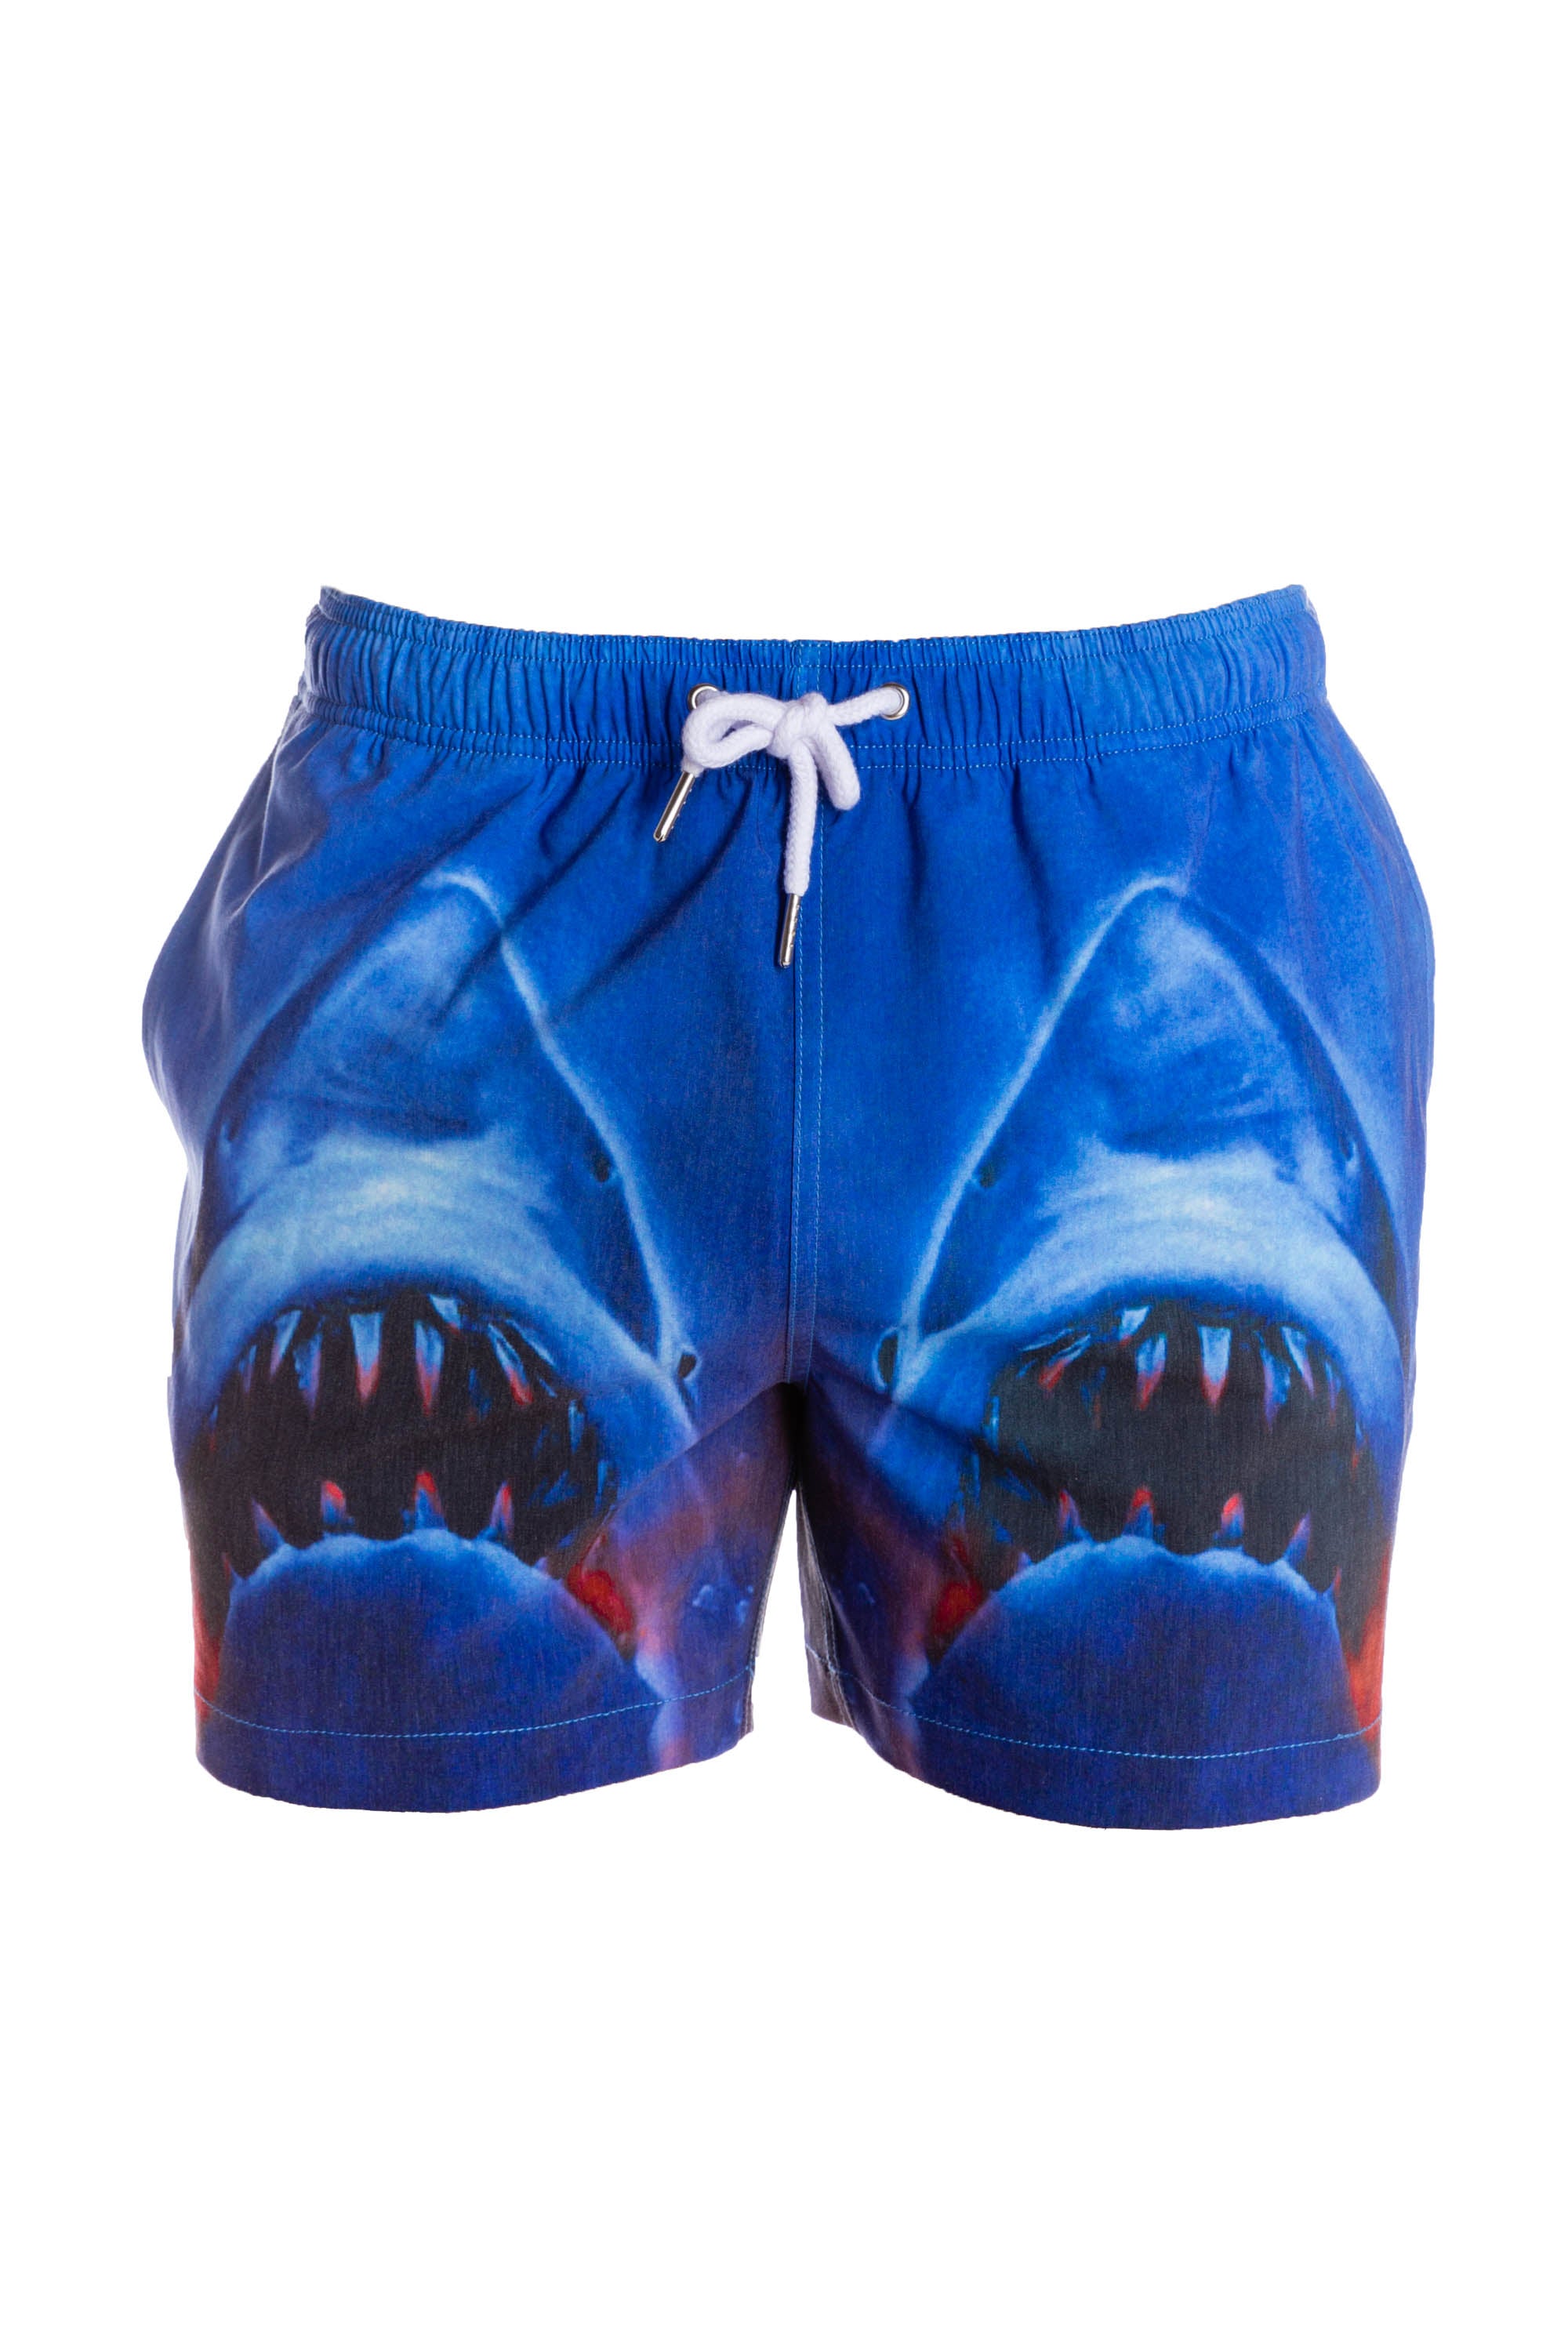 Jaws Shark Swim Trunks | The Swallow You Wholes